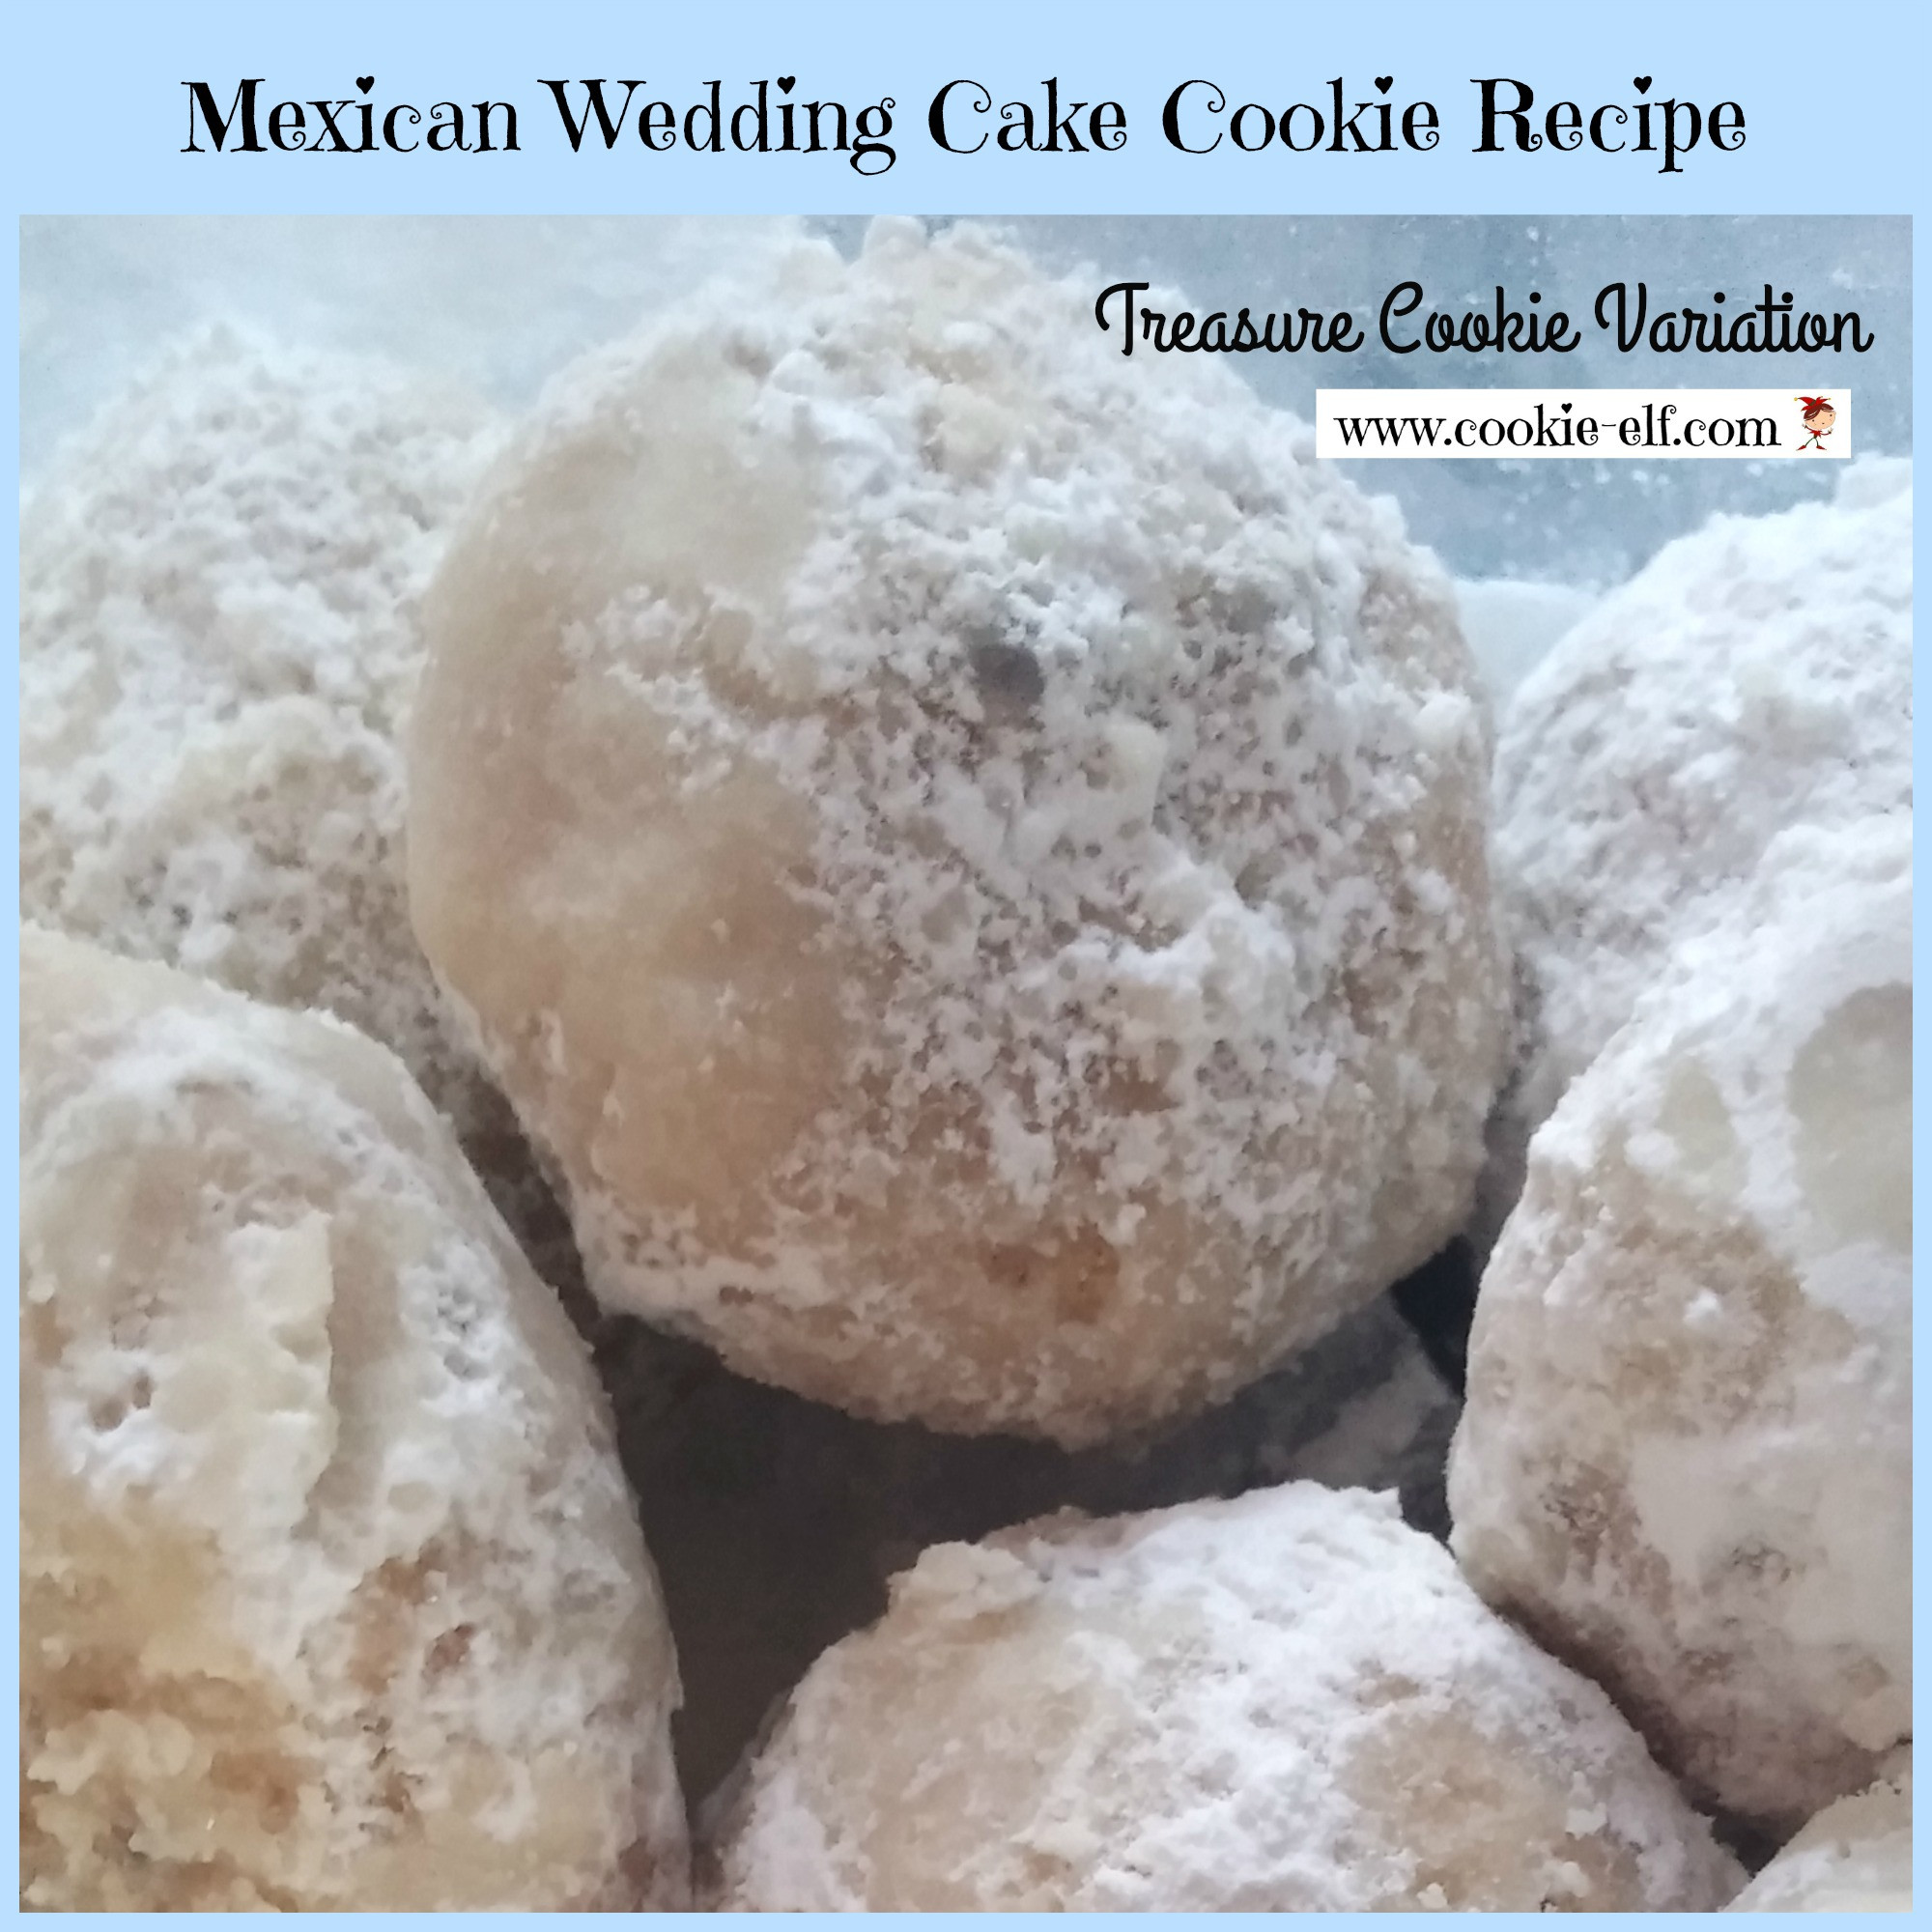 Recipe For Mexican Wedding Cake Cookies
 Mexican Wedding Cake Cookie Recipe Easy “Treasure Cookies